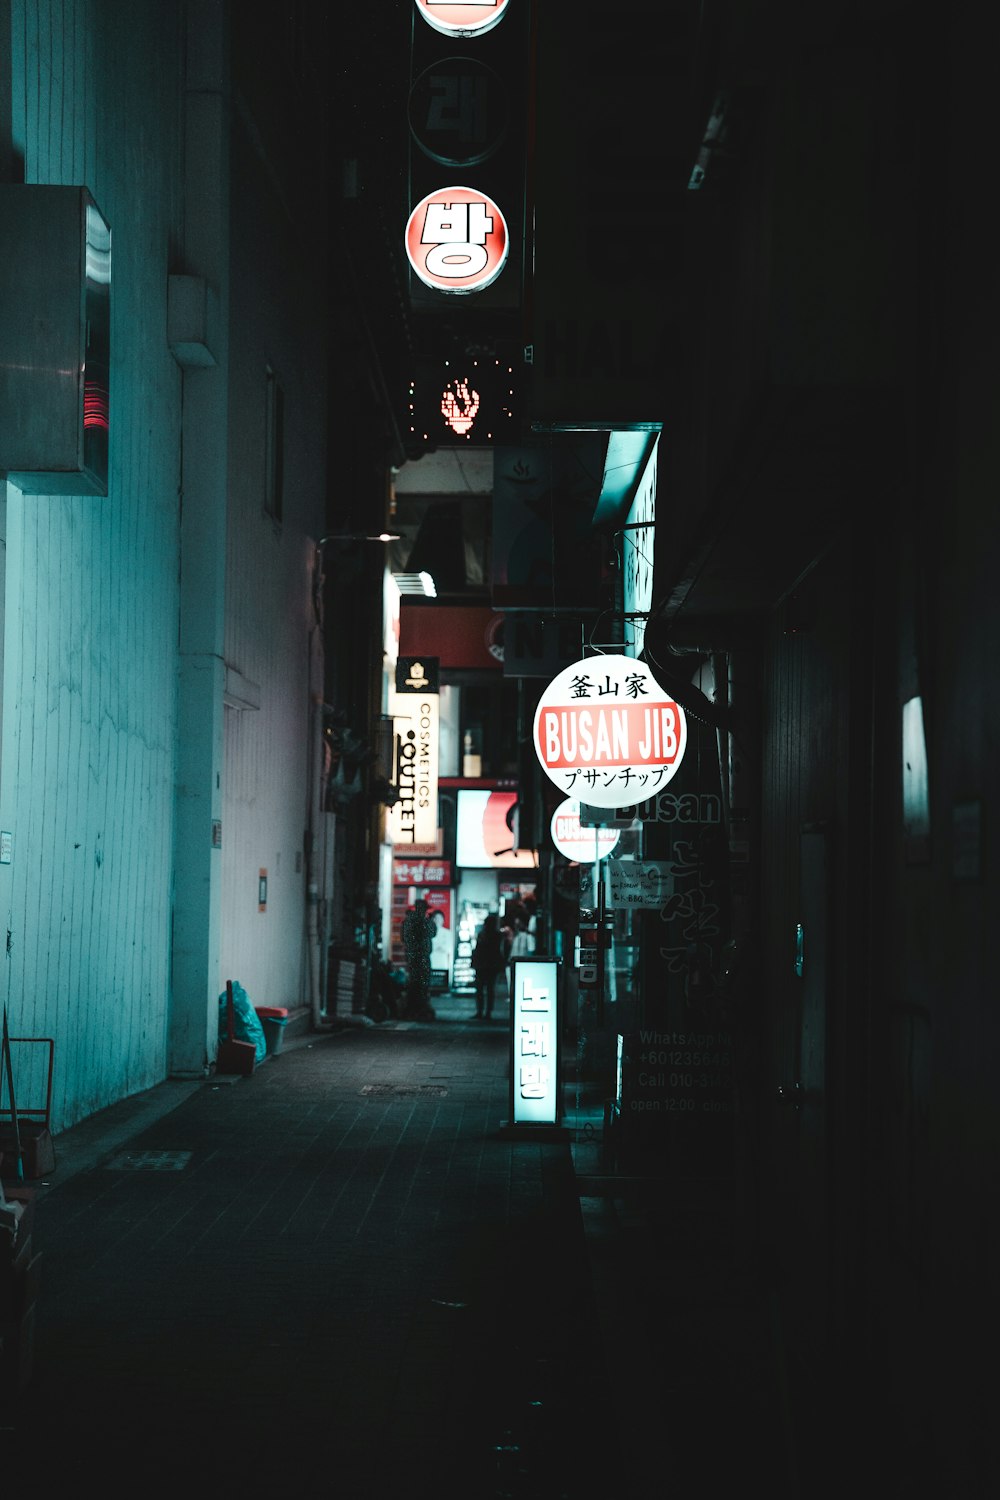 a dark alley with neon signs and a person sitting on a bench